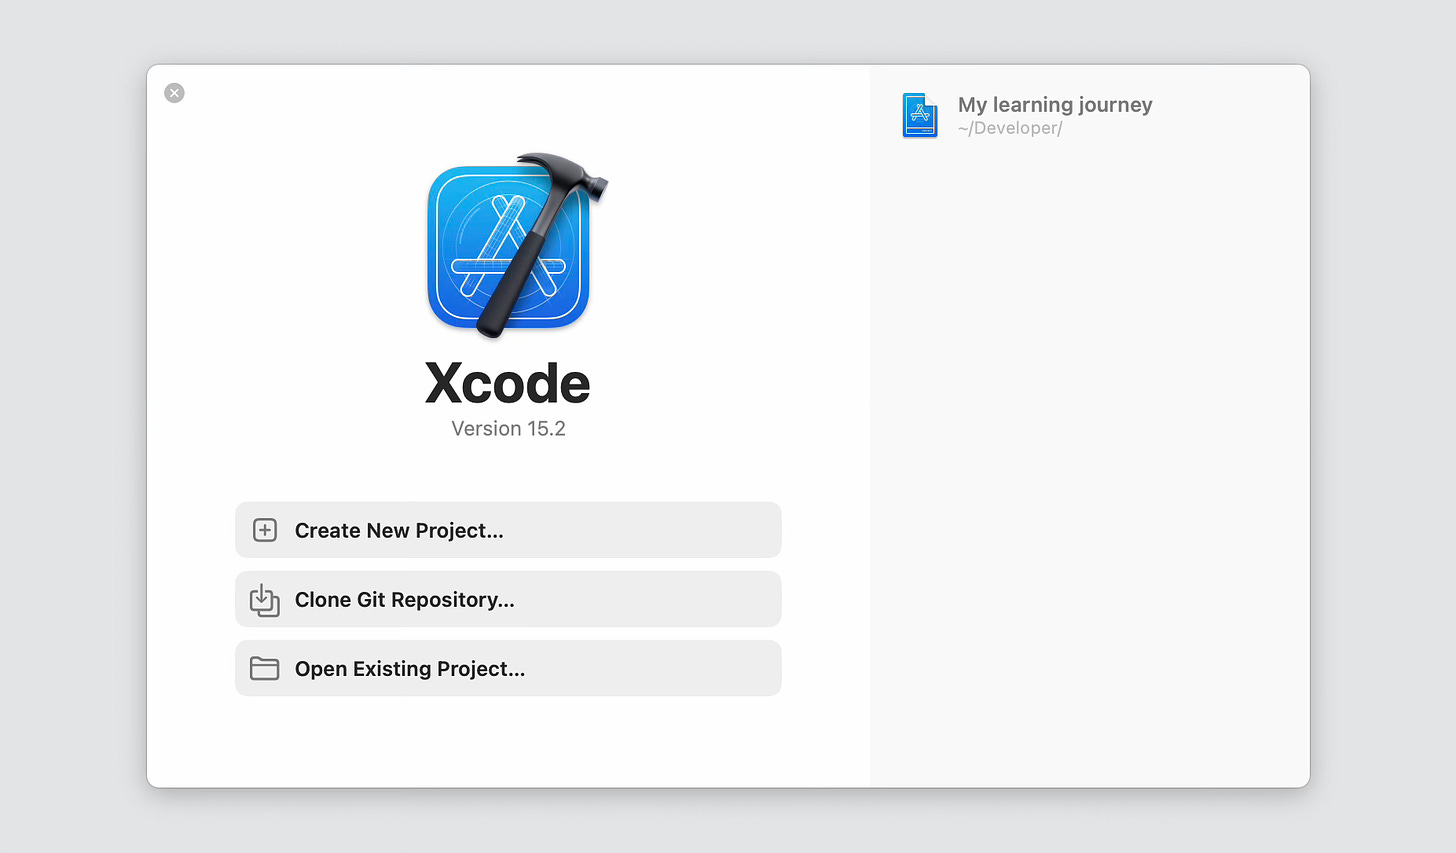 Printscreen of Xcode opening modal showing a "My learning journey" fictional project